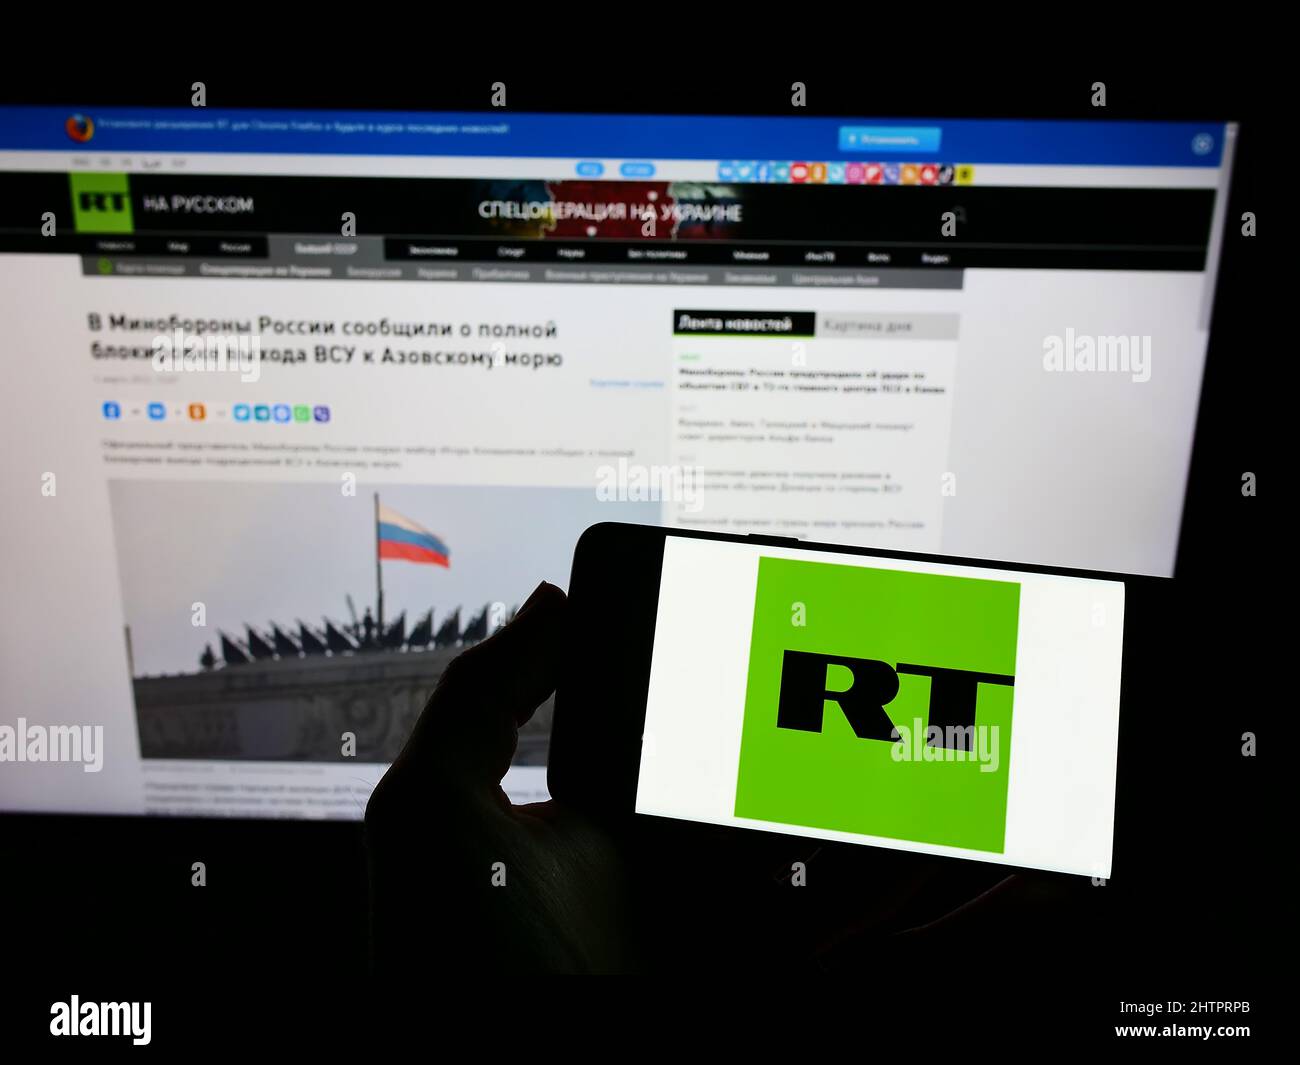 Person holding mobile phone with logo of Russian state-controlled television company RT on screen in front of web page. Focus on phone display. Stock Photo